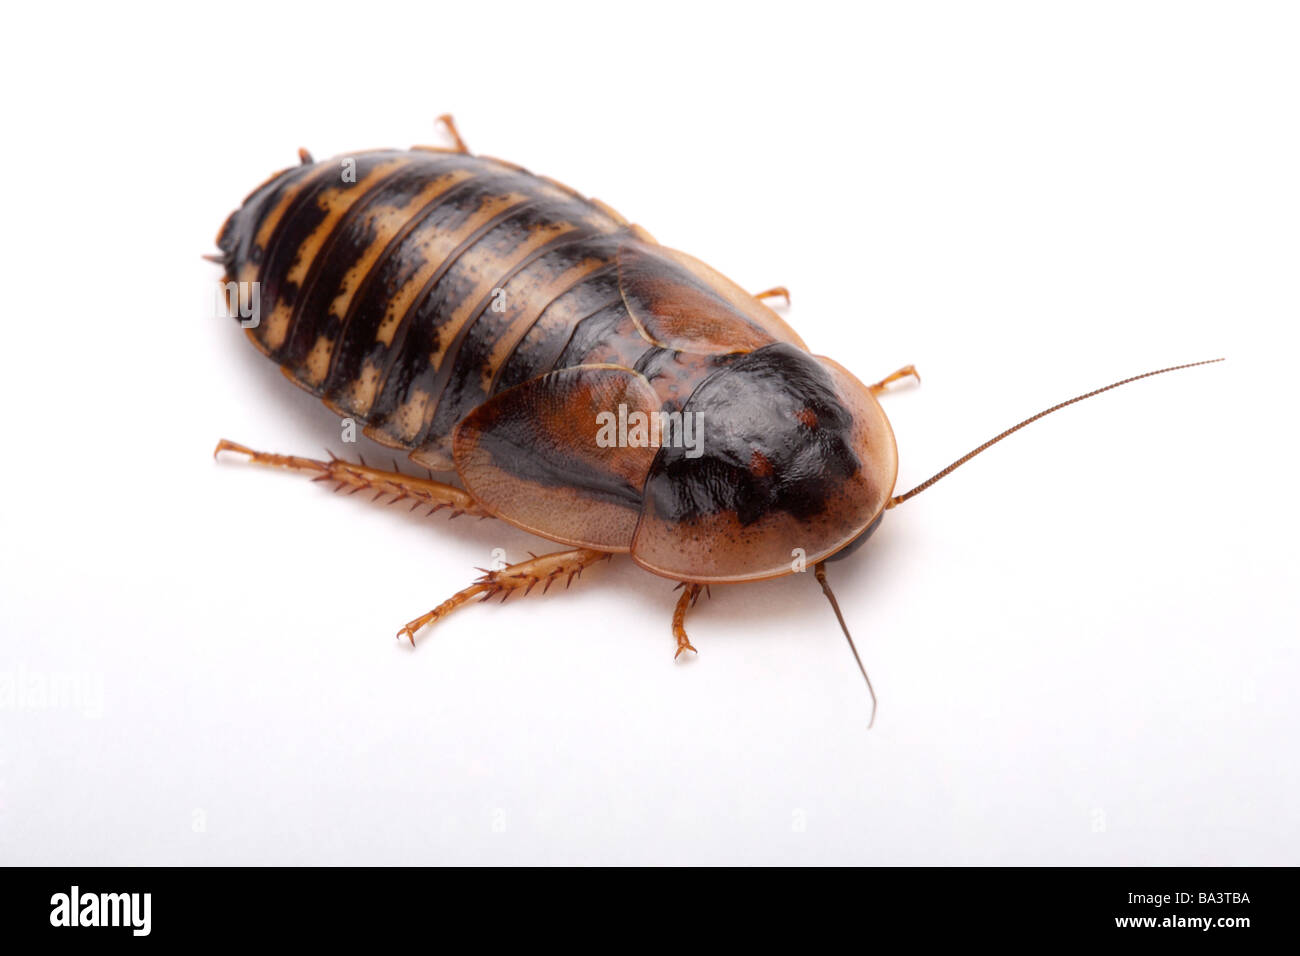 Cockroach Guyana Orange Spotted Roach close up overhead view Stock Photo